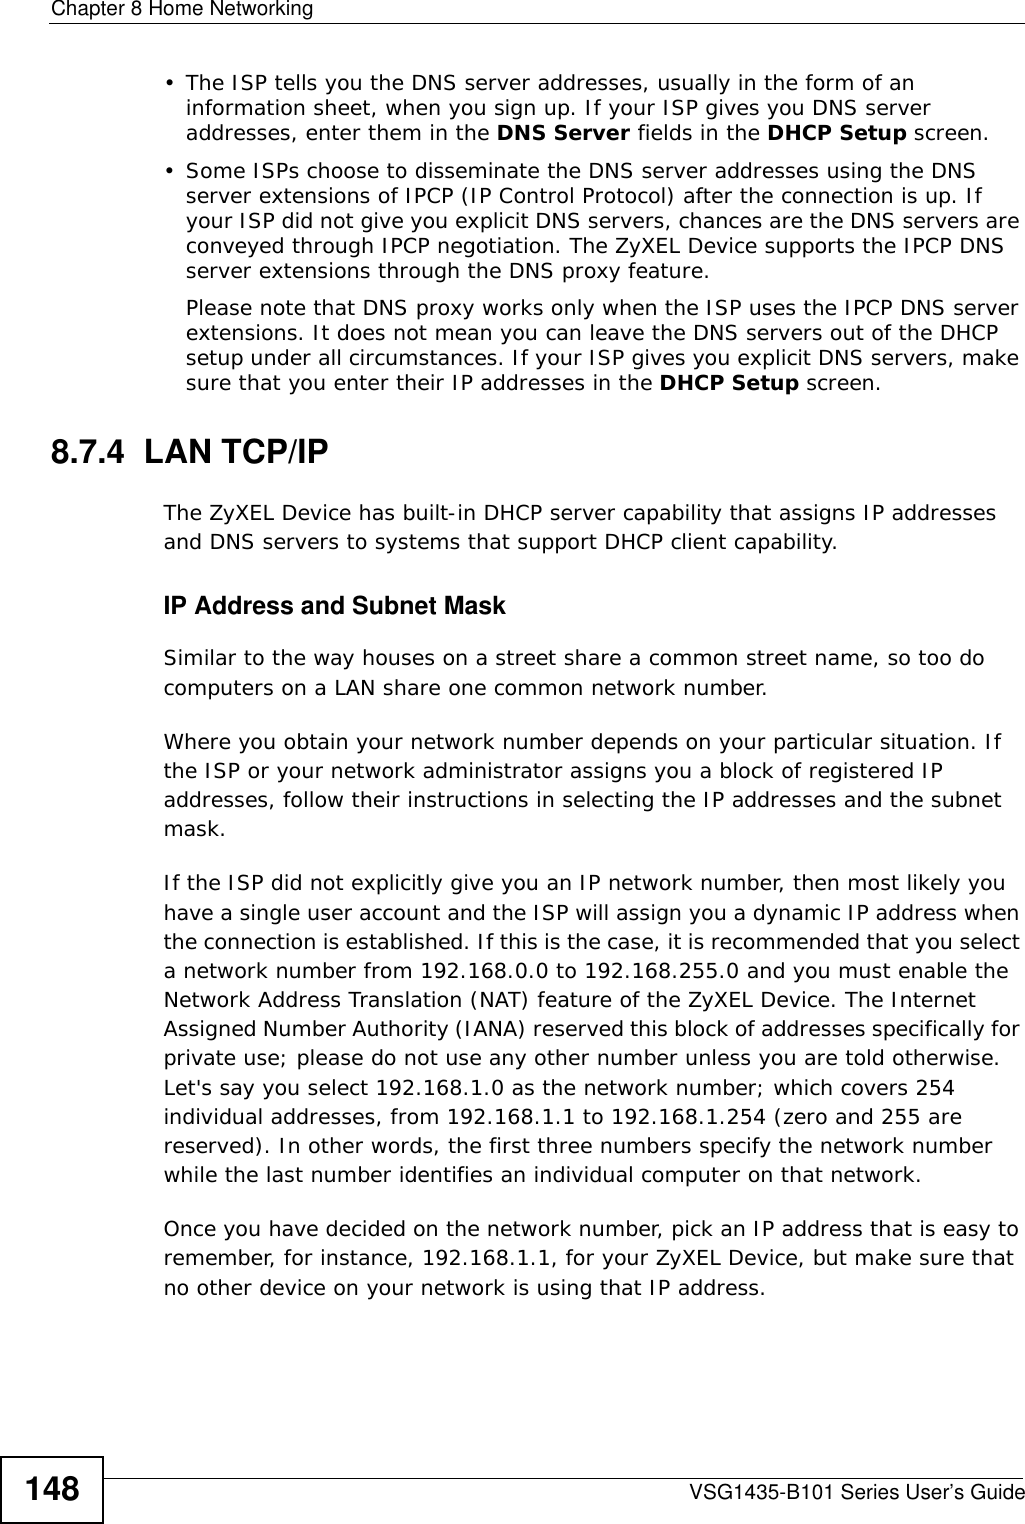 Chapter 8 Home NetworkingVSG1435-B101 Series User’s Guide148• The ISP tells you the DNS server addresses, usually in the form of an information sheet, when you sign up. If your ISP gives you DNS server addresses, enter them in the DNS Server fields in the DHCP Setup screen.• Some ISPs choose to disseminate the DNS server addresses using the DNS server extensions of IPCP (IP Control Protocol) after the connection is up. If your ISP did not give you explicit DNS servers, chances are the DNS servers are conveyed through IPCP negotiation. The ZyXEL Device supports the IPCP DNS server extensions through the DNS proxy feature.Please note that DNS proxy works only when the ISP uses the IPCP DNS server extensions. It does not mean you can leave the DNS servers out of the DHCP setup under all circumstances. If your ISP gives you explicit DNS servers, make sure that you enter their IP addresses in the DHCP Setup screen.8.7.4  LAN TCP/IP The ZyXEL Device has built-in DHCP server capability that assigns IP addresses and DNS servers to systems that support DHCP client capability.IP Address and Subnet MaskSimilar to the way houses on a street share a common street name, so too do computers on a LAN share one common network number.Where you obtain your network number depends on your particular situation. If the ISP or your network administrator assigns you a block of registered IP addresses, follow their instructions in selecting the IP addresses and the subnet mask.If the ISP did not explicitly give you an IP network number, then most likely you have a single user account and the ISP will assign you a dynamic IP address when the connection is established. If this is the case, it is recommended that you select a network number from 192.168.0.0 to 192.168.255.0 and you must enable the Network Address Translation (NAT) feature of the ZyXEL Device. The Internet Assigned Number Authority (IANA) reserved this block of addresses specifically for private use; please do not use any other number unless you are told otherwise. Let&apos;s say you select 192.168.1.0 as the network number; which covers 254 individual addresses, from 192.168.1.1 to 192.168.1.254 (zero and 255 are reserved). In other words, the first three numbers specify the network number while the last number identifies an individual computer on that network.Once you have decided on the network number, pick an IP address that is easy to remember, for instance, 192.168.1.1, for your ZyXEL Device, but make sure that no other device on your network is using that IP address.